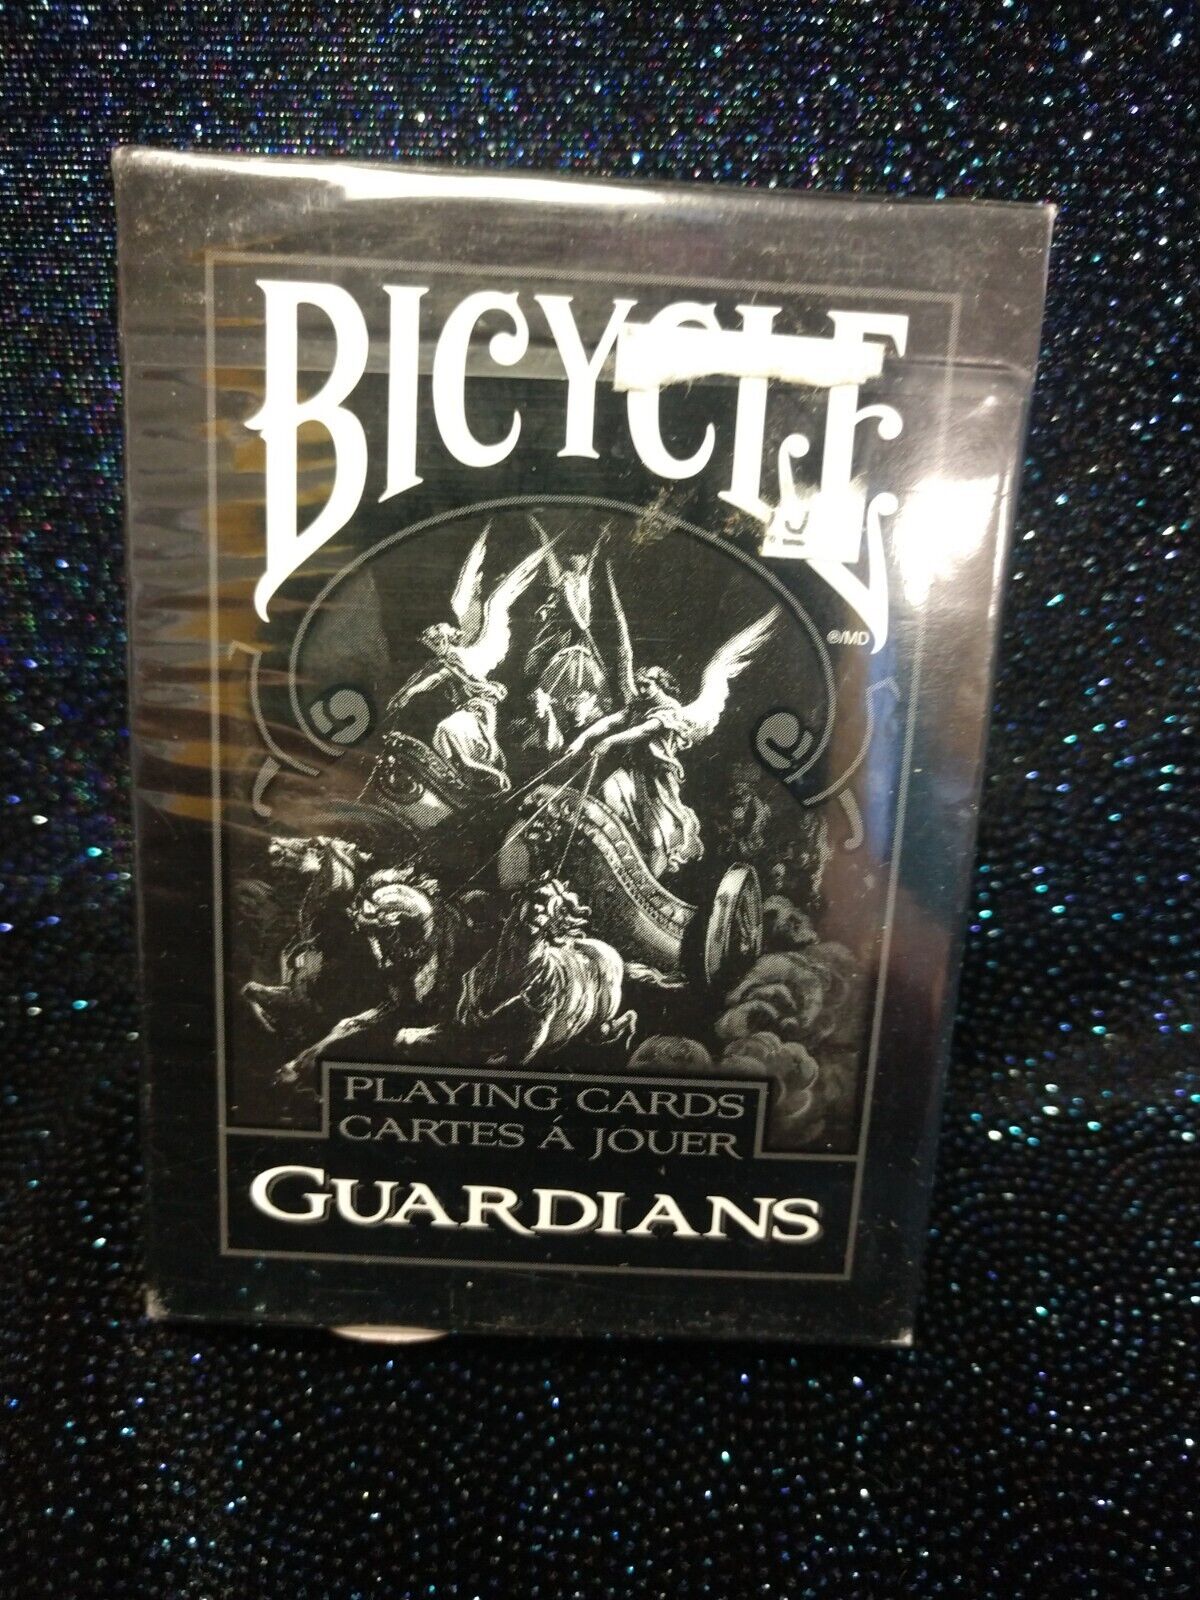 Bicycle Guardians An International Bestseller Playing Cards